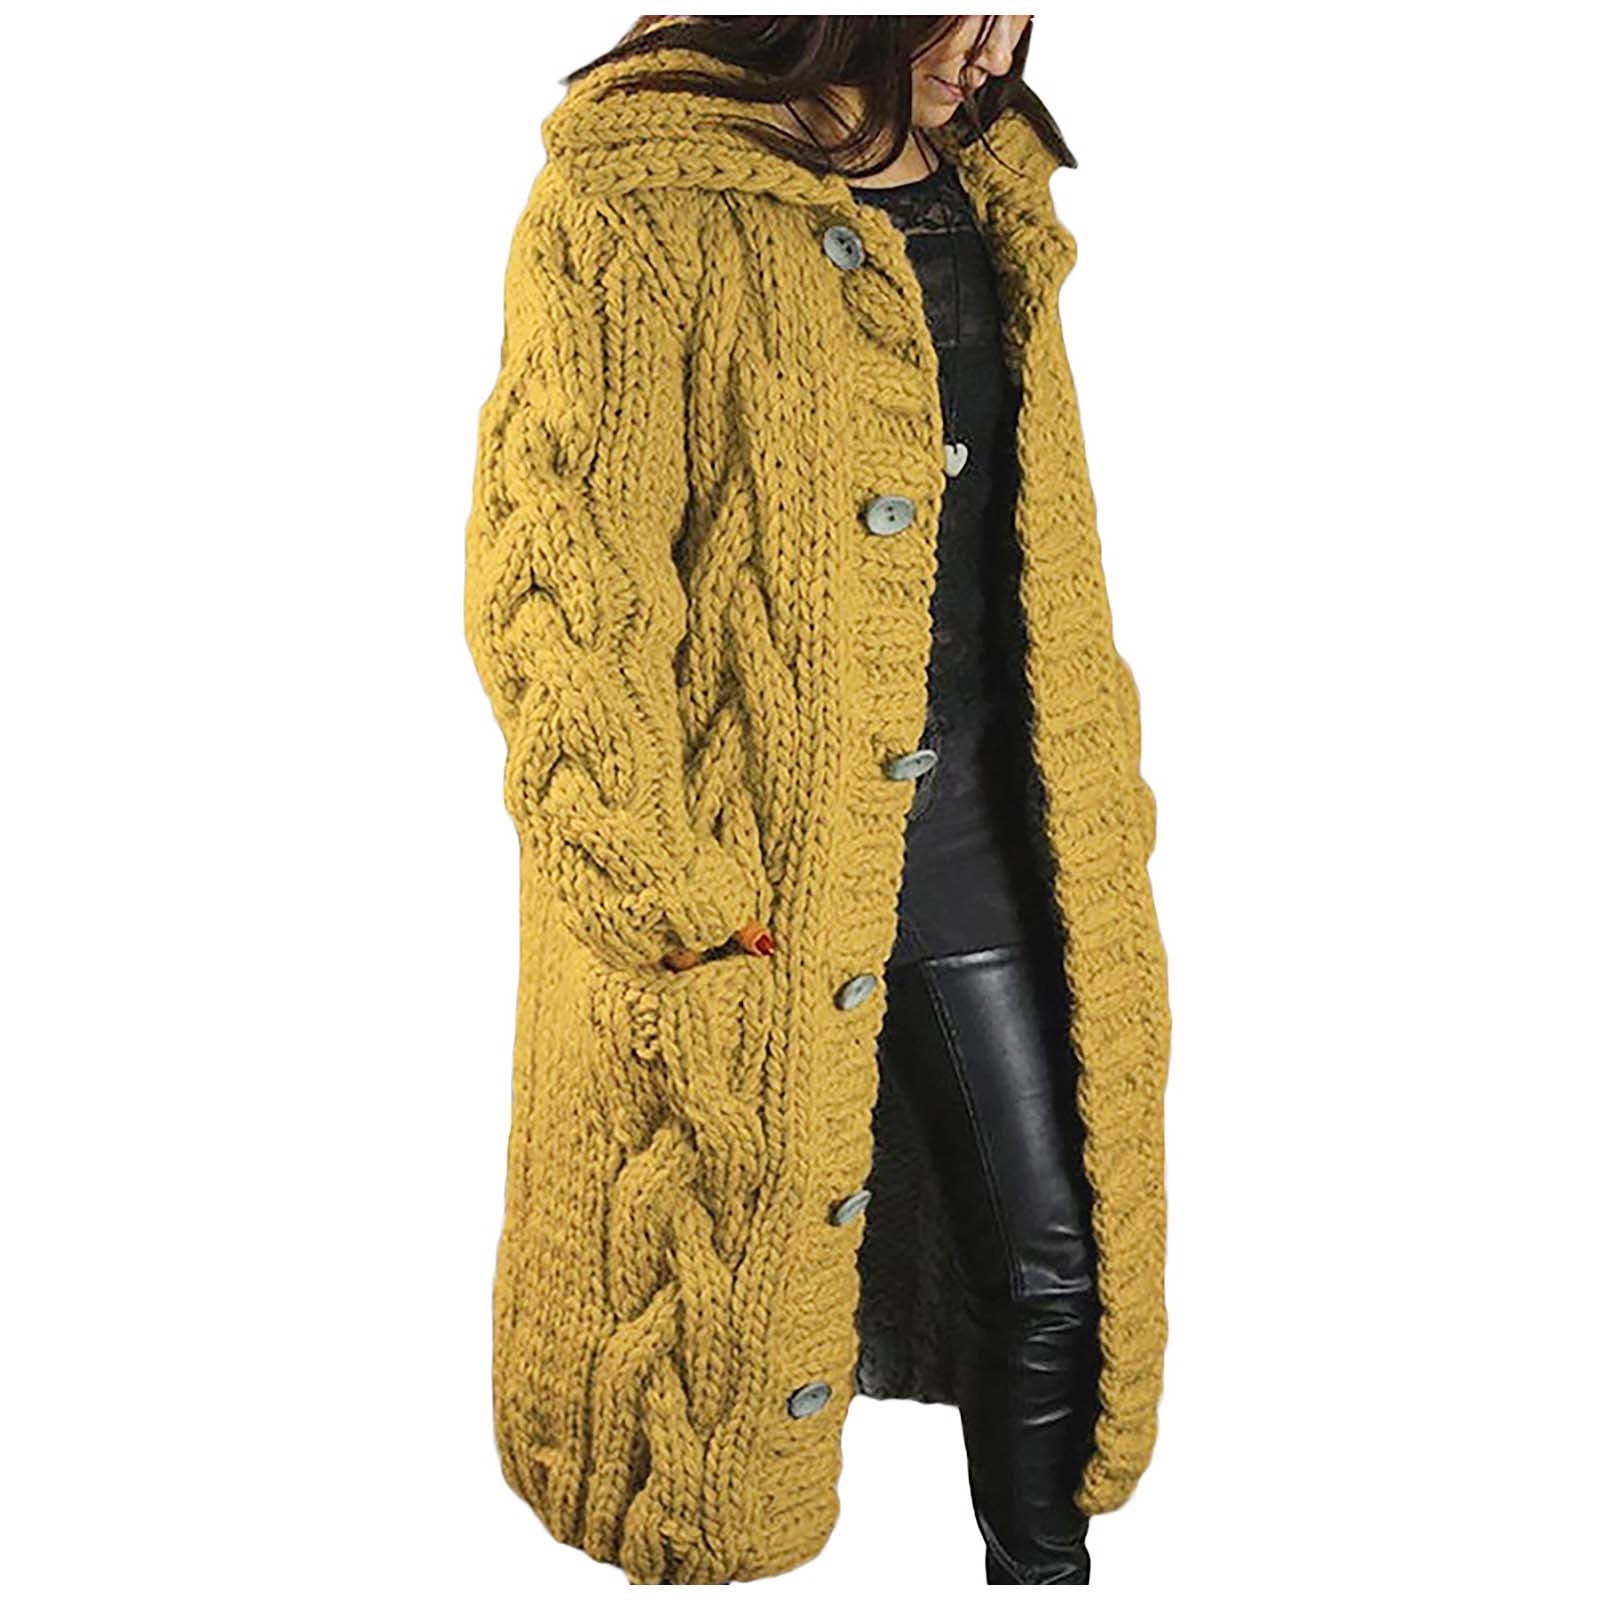 Sweater Cardigan for Women Solid Color Cardigan Coat Hooded Open Front ...